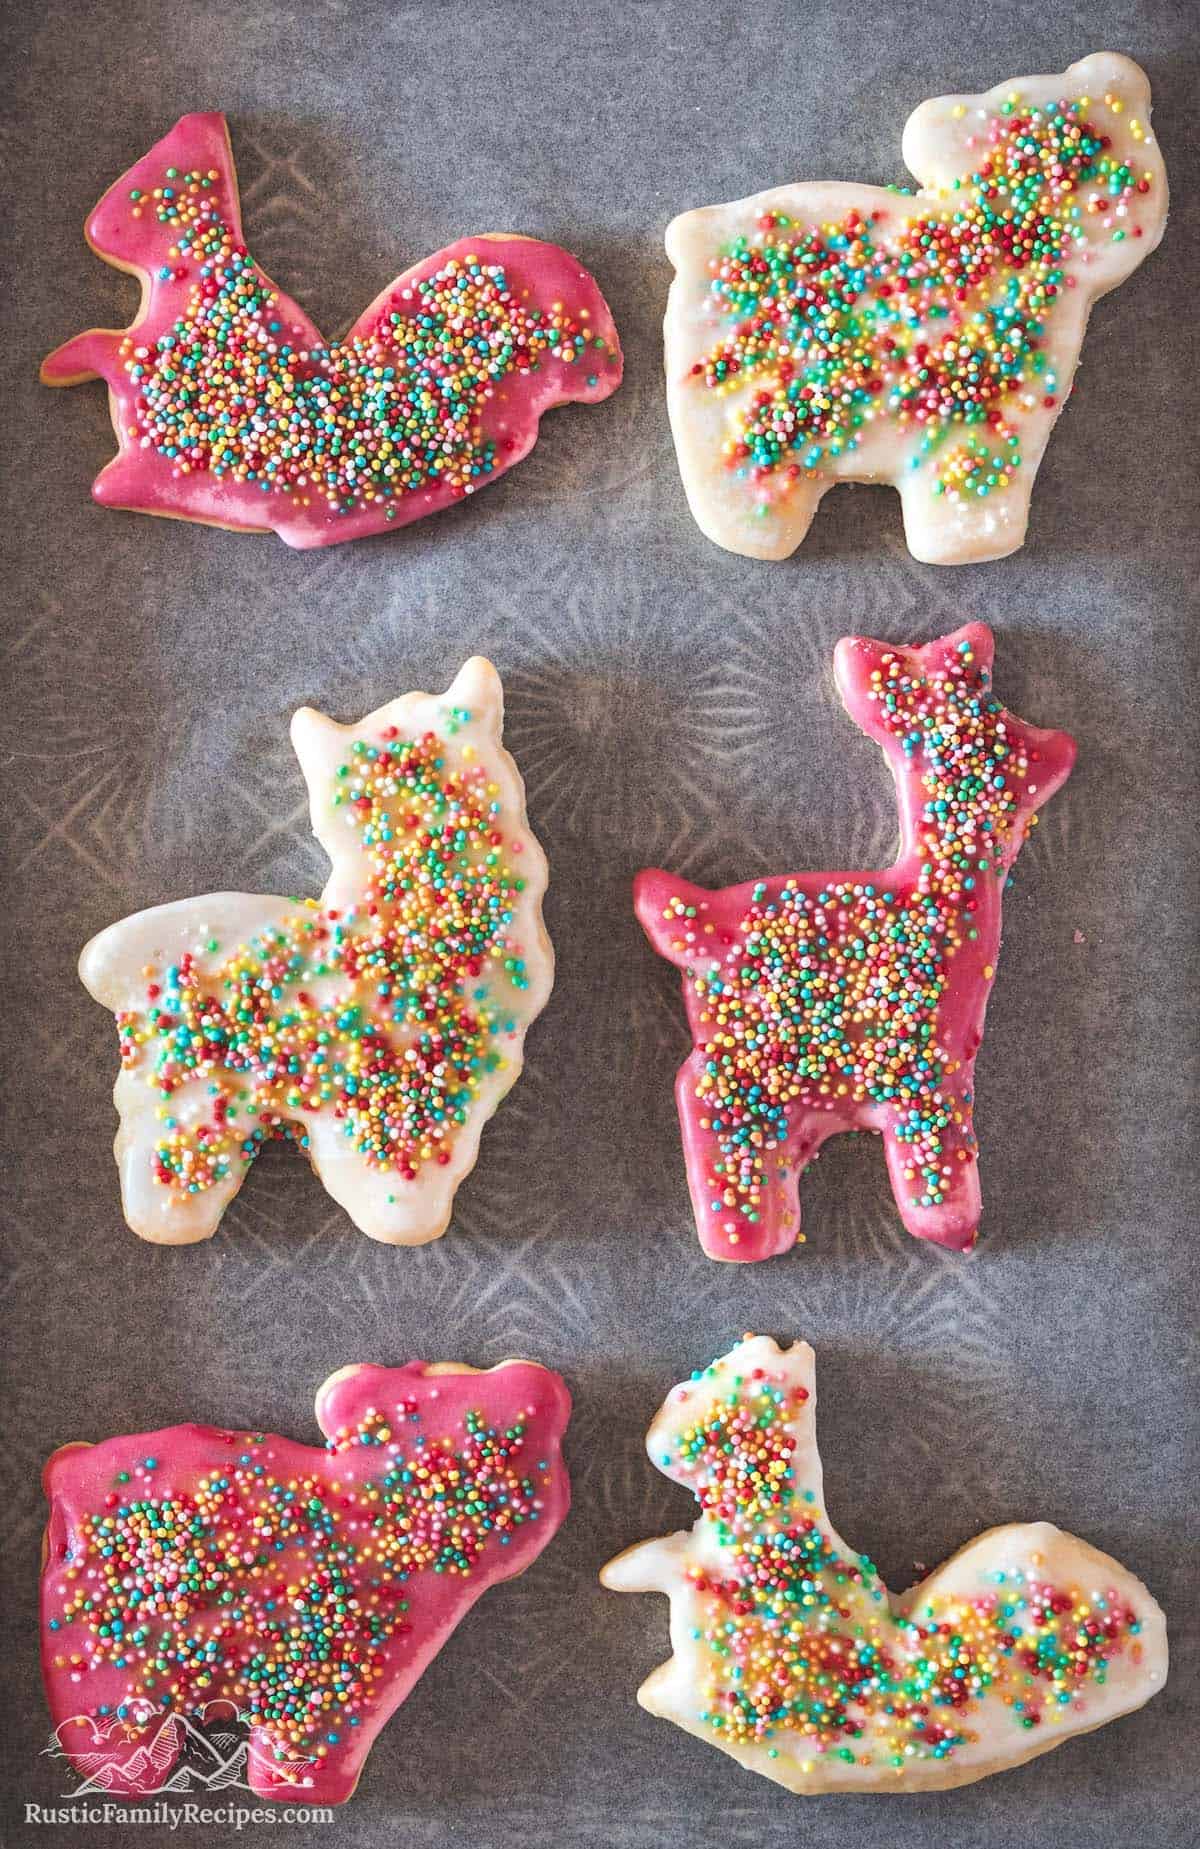 Frosted animal crackers shaped like a squirrel, deer and sheep